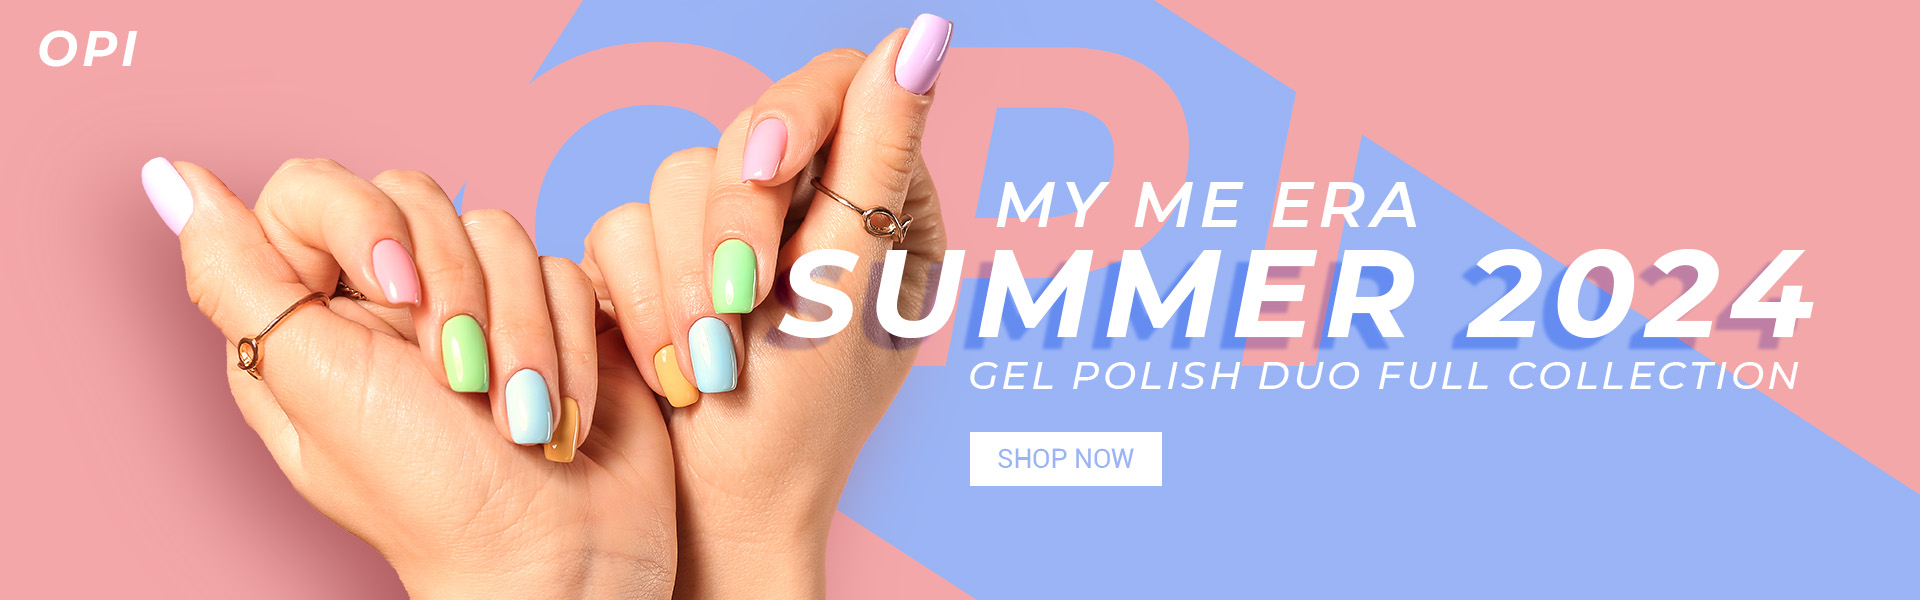 OPI Summer 2024 Gel Polish Duo Full Collection